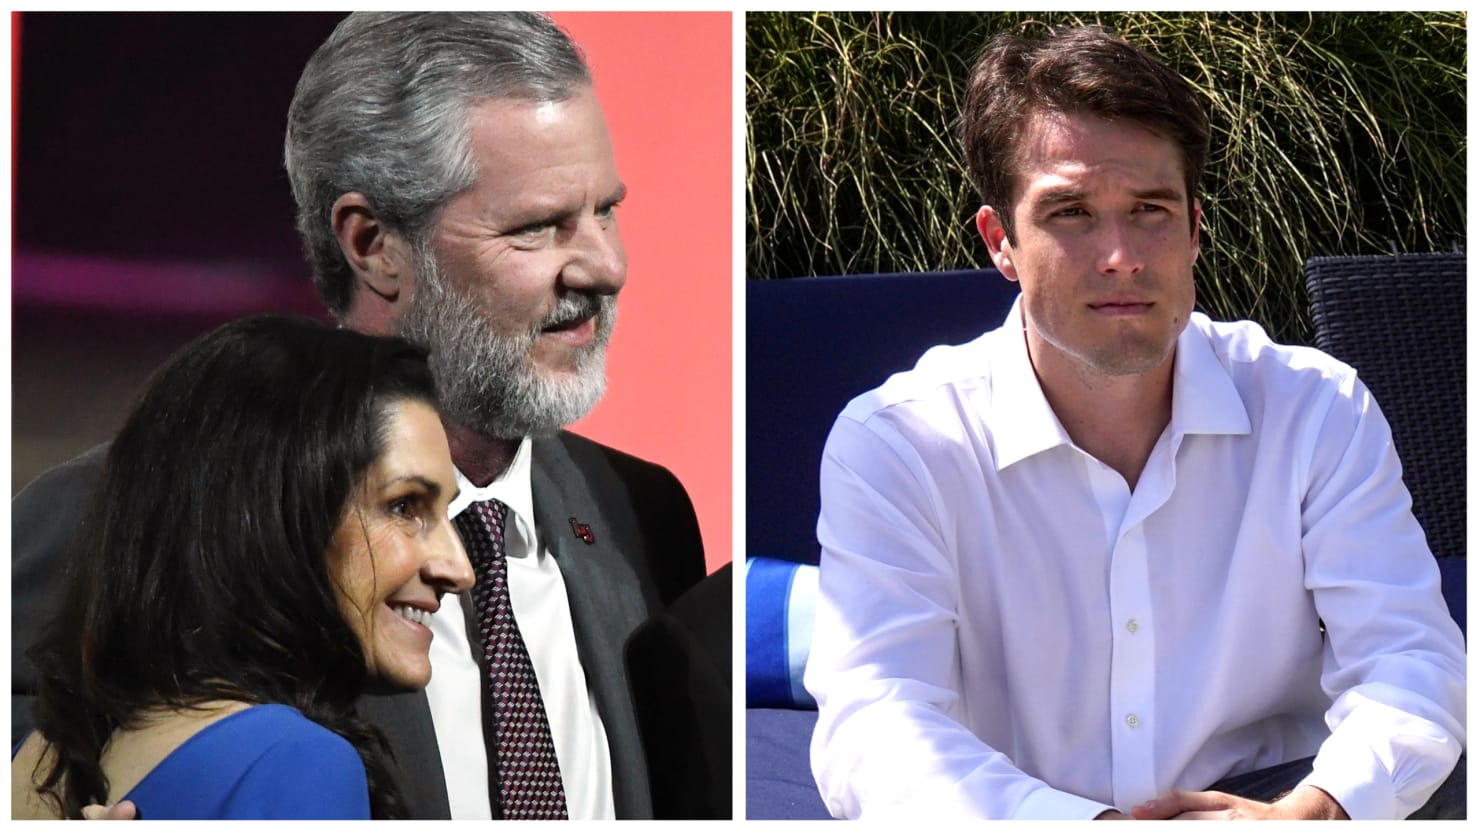 Pool Boy: Giddy Jerry Falwell Was ‘Disconcerting’ During Threesome With ...